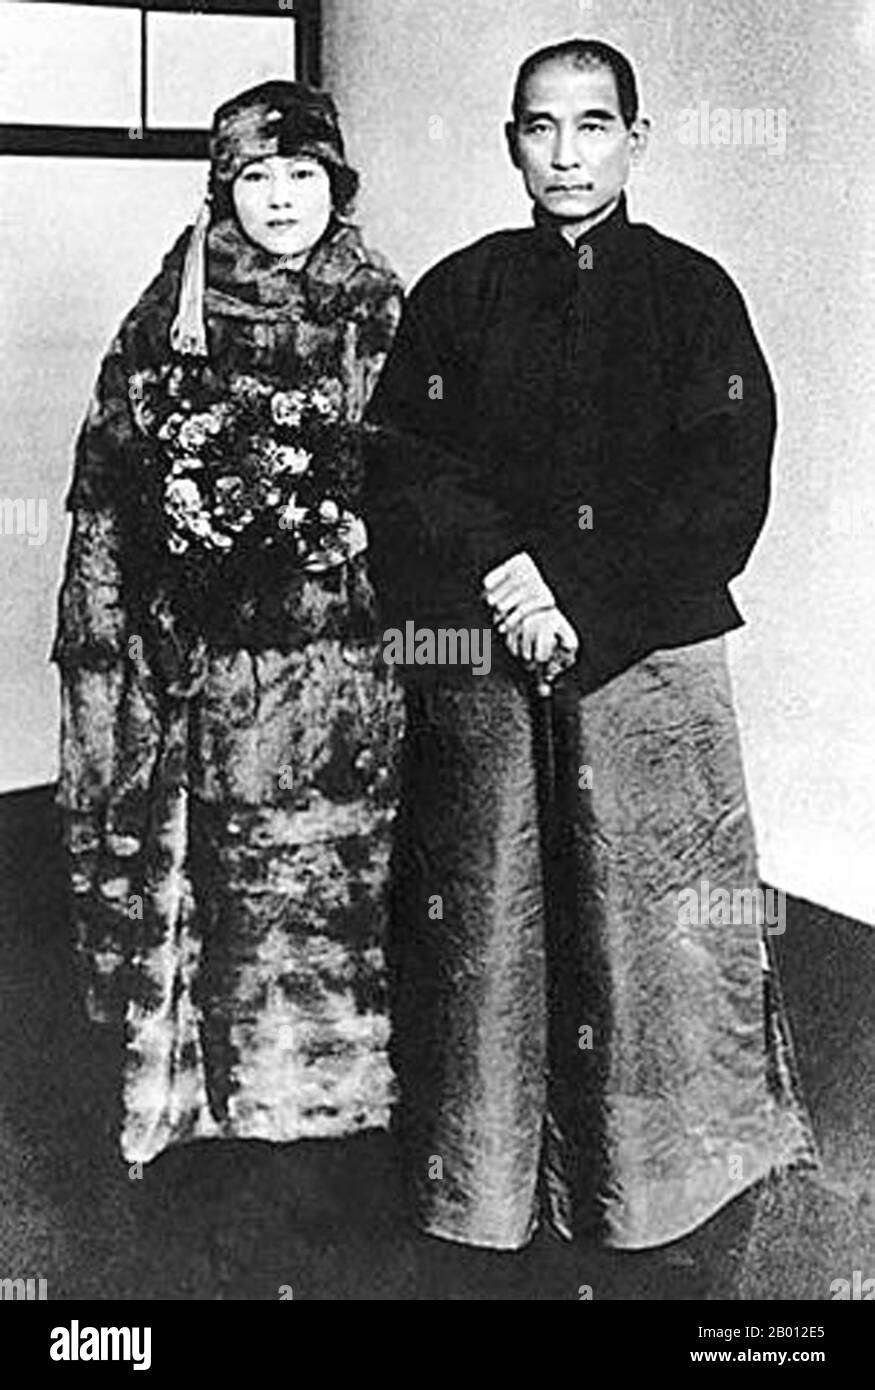 China: Song Qingling (1892-1981), first female Chairman and President of the People's Republic of China, together with her husband, Dr Sun Yat-sen (1866-1925), founder of the Chinese Republic (1912), early 20th century.  Sun Yat-sen (12 November 1866 – 12 March 1925) was a Chinese revolutionary and political leader. As the foremost pioneer of Nationalist China, Sun is frequently referred to as the Founding Father of Republican China.  Song Qingling (27 January 1893 – 29 May 1981), also known as Madame Sun Yat-sen, was one of the three Song sisters. Stock Photo